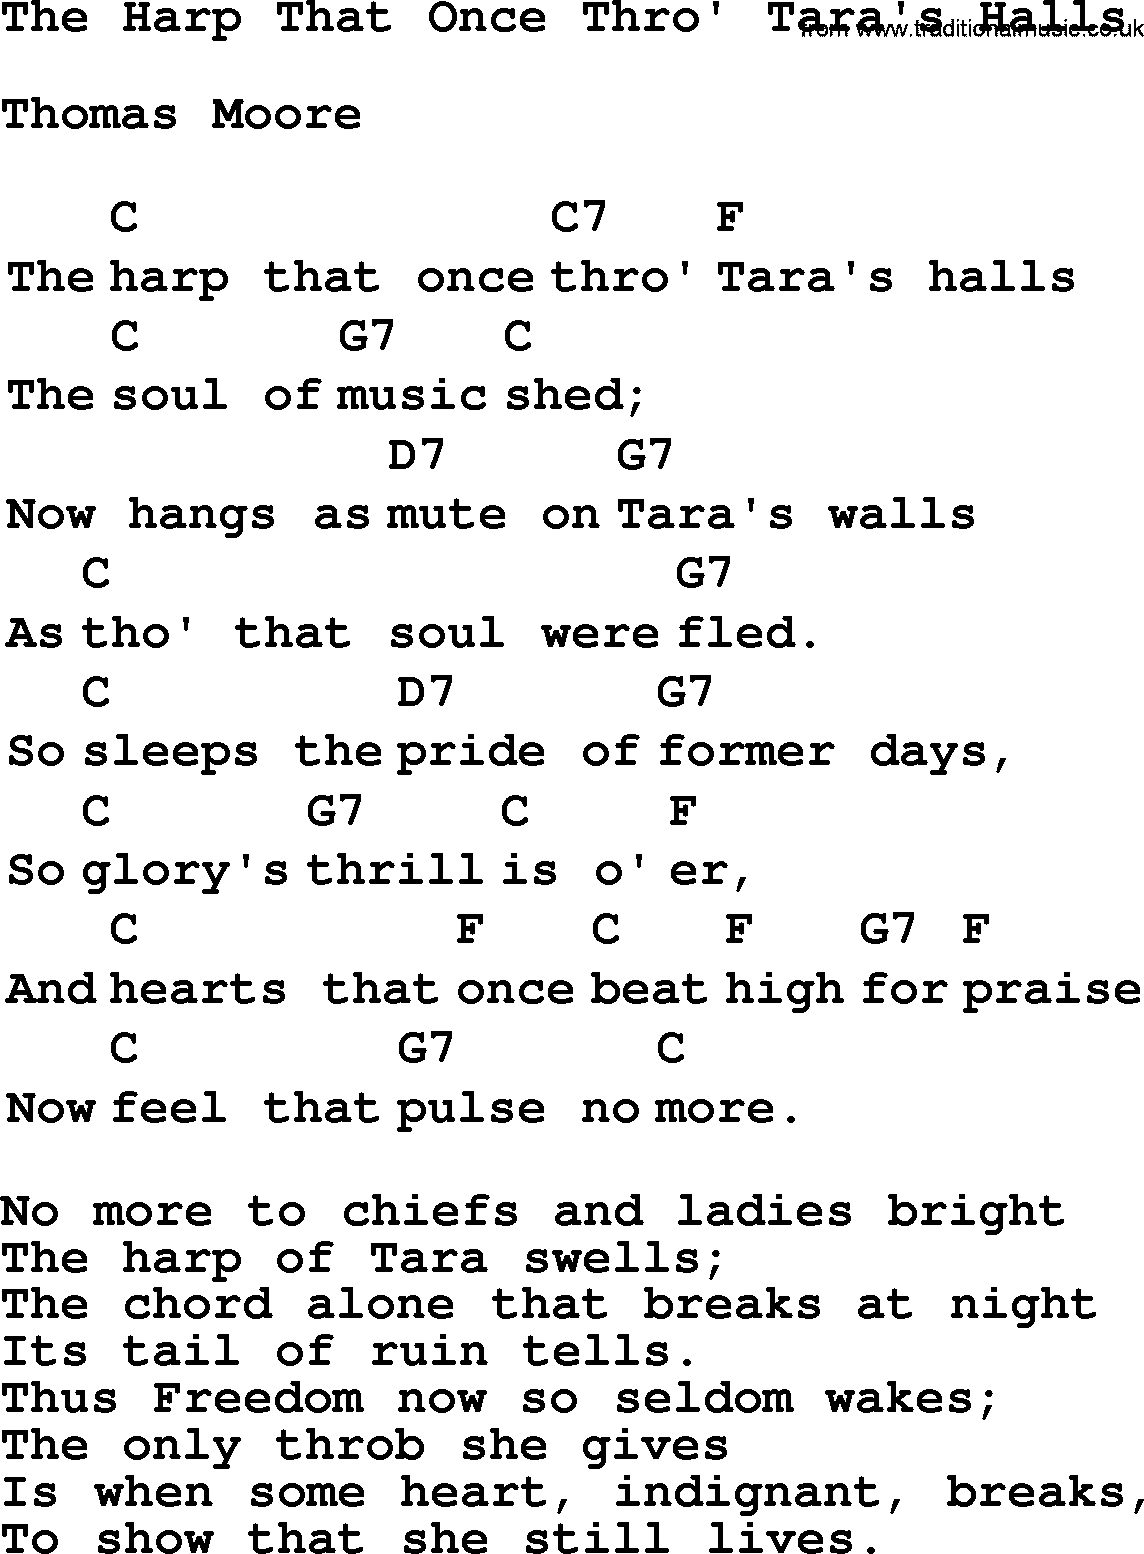 Top 1000 Most Popular Folk and Old-time Songs: Harp That Once Thro Taras Halls, lyrics and chords